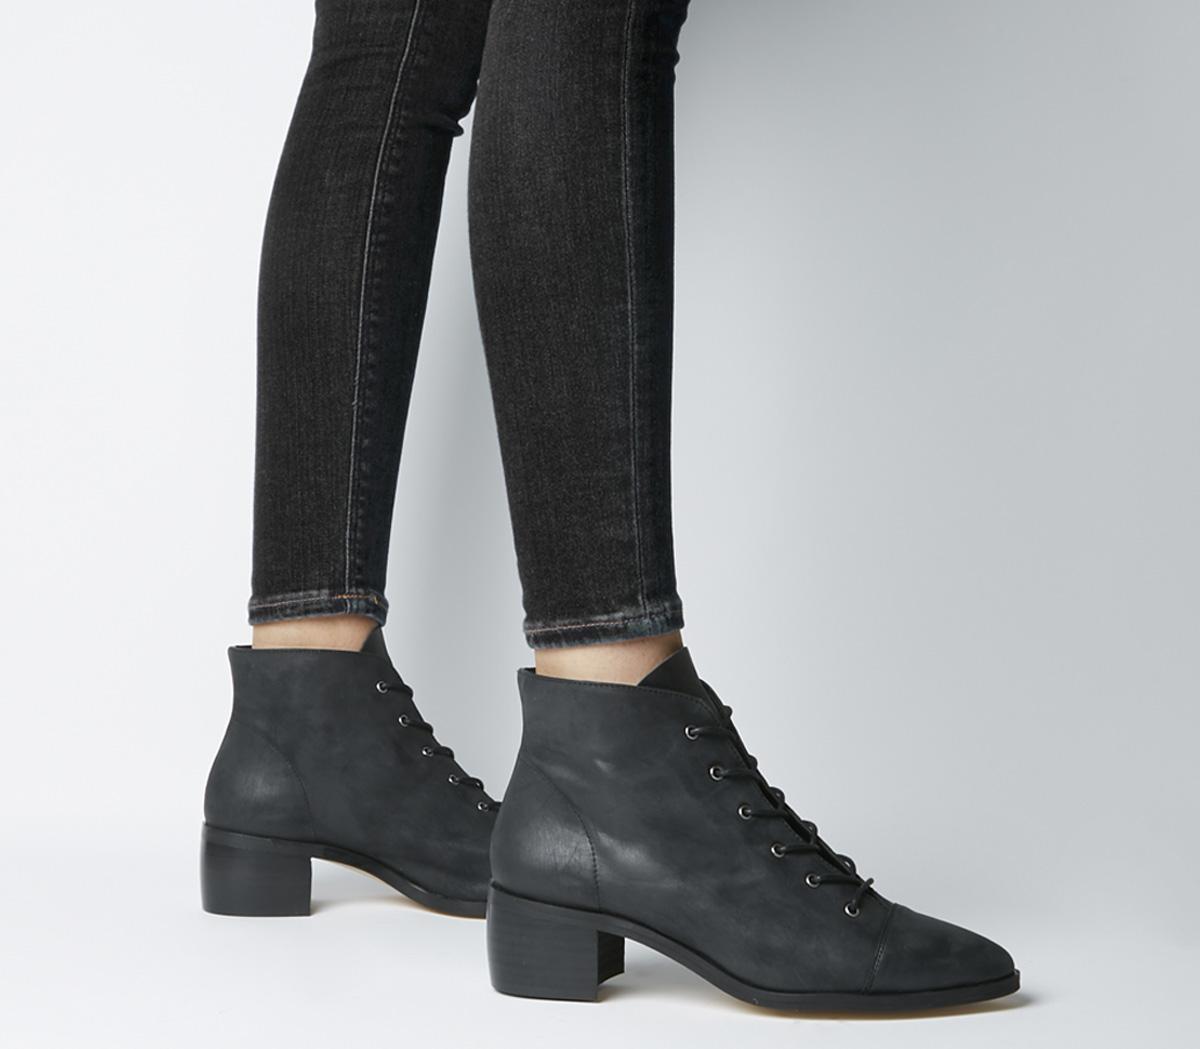 OFFICEAccord Lace Up BootsBlack Leather